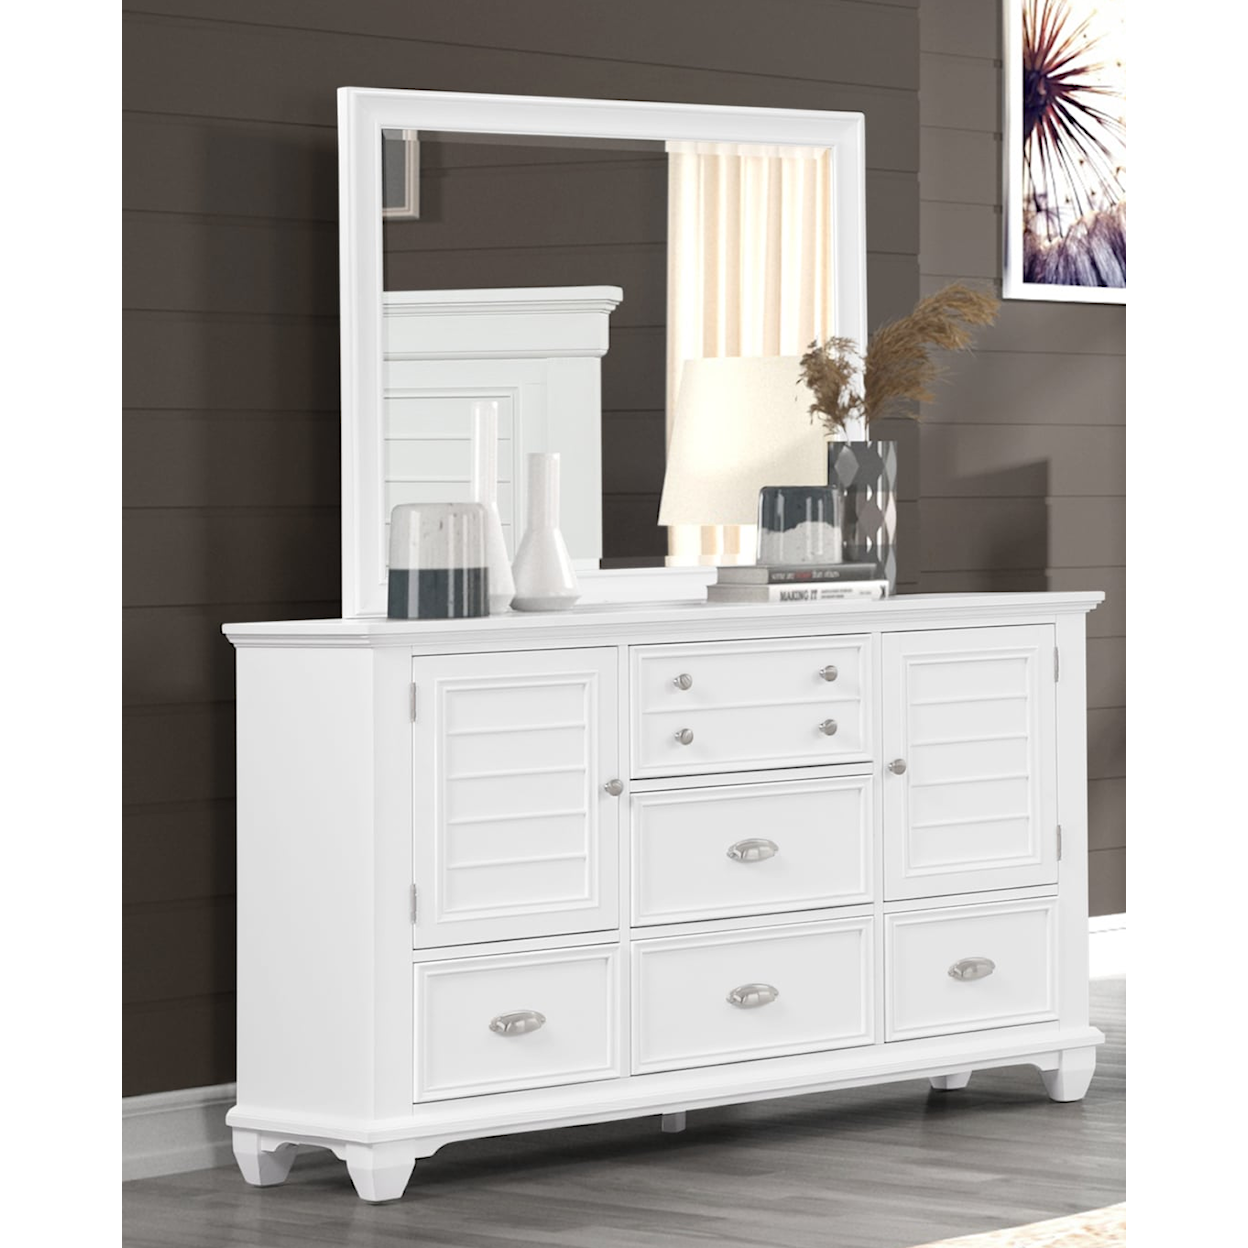 New Classic Jamestown Dresser with Attached Mirror